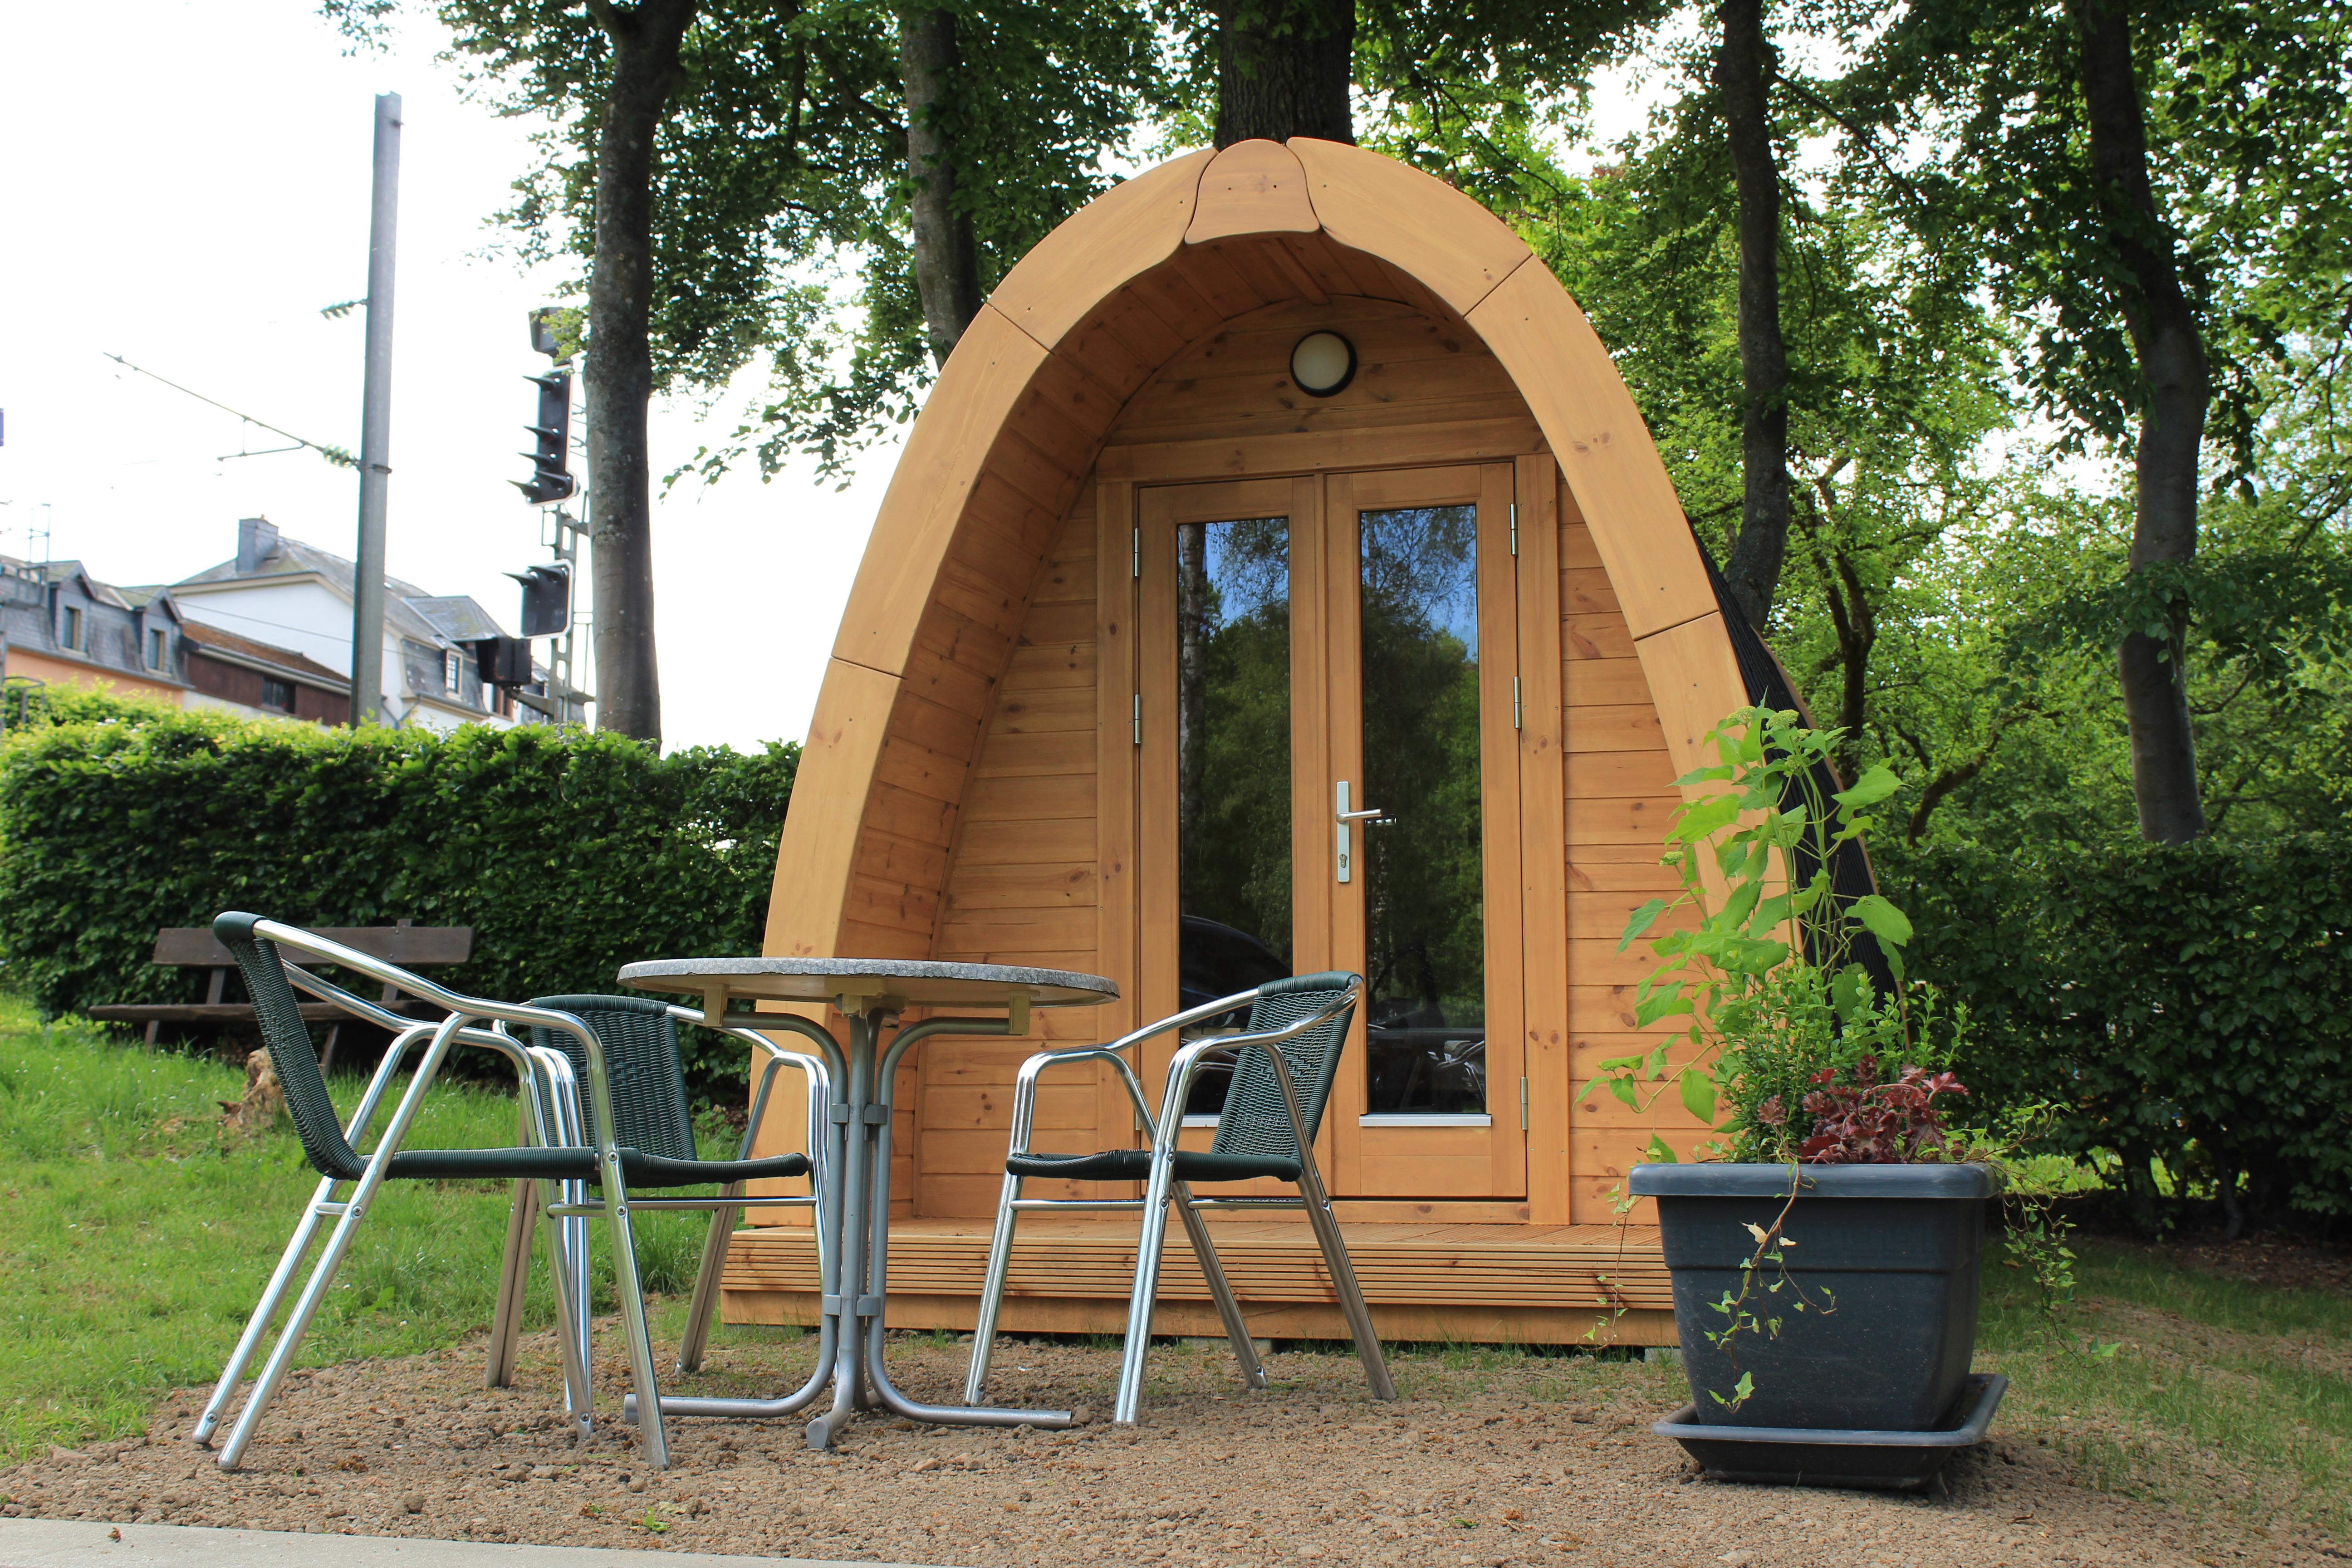 Accommodation - Pod, Including Littery. - Camping Troisvierges